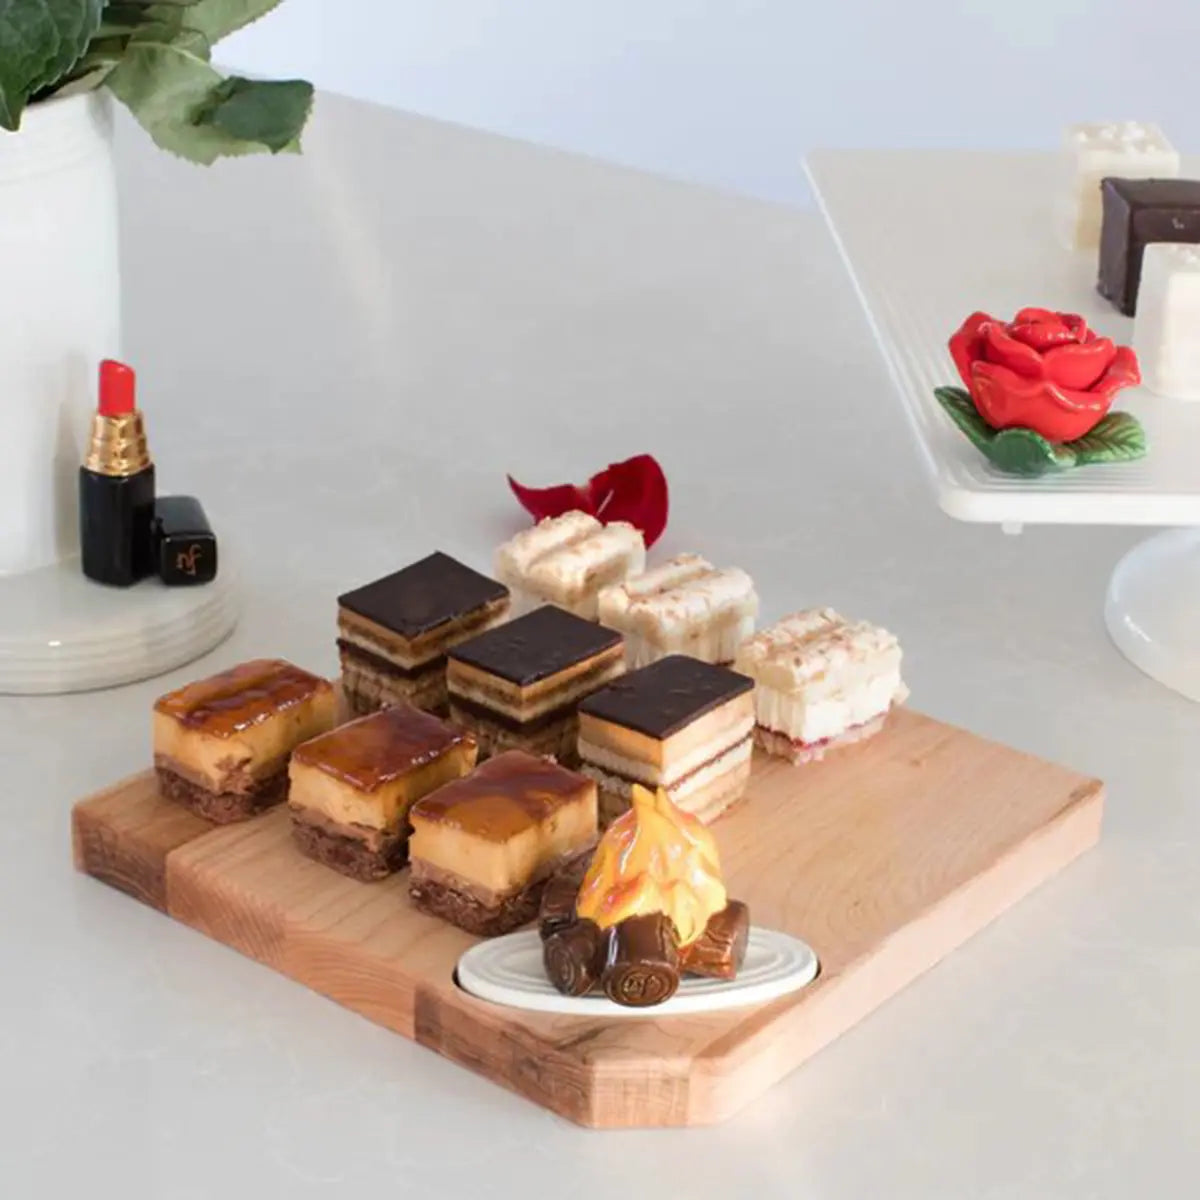 Nora Fleming Hello Gorgeous Lipstick Mini on a container with food and a wooden tray.